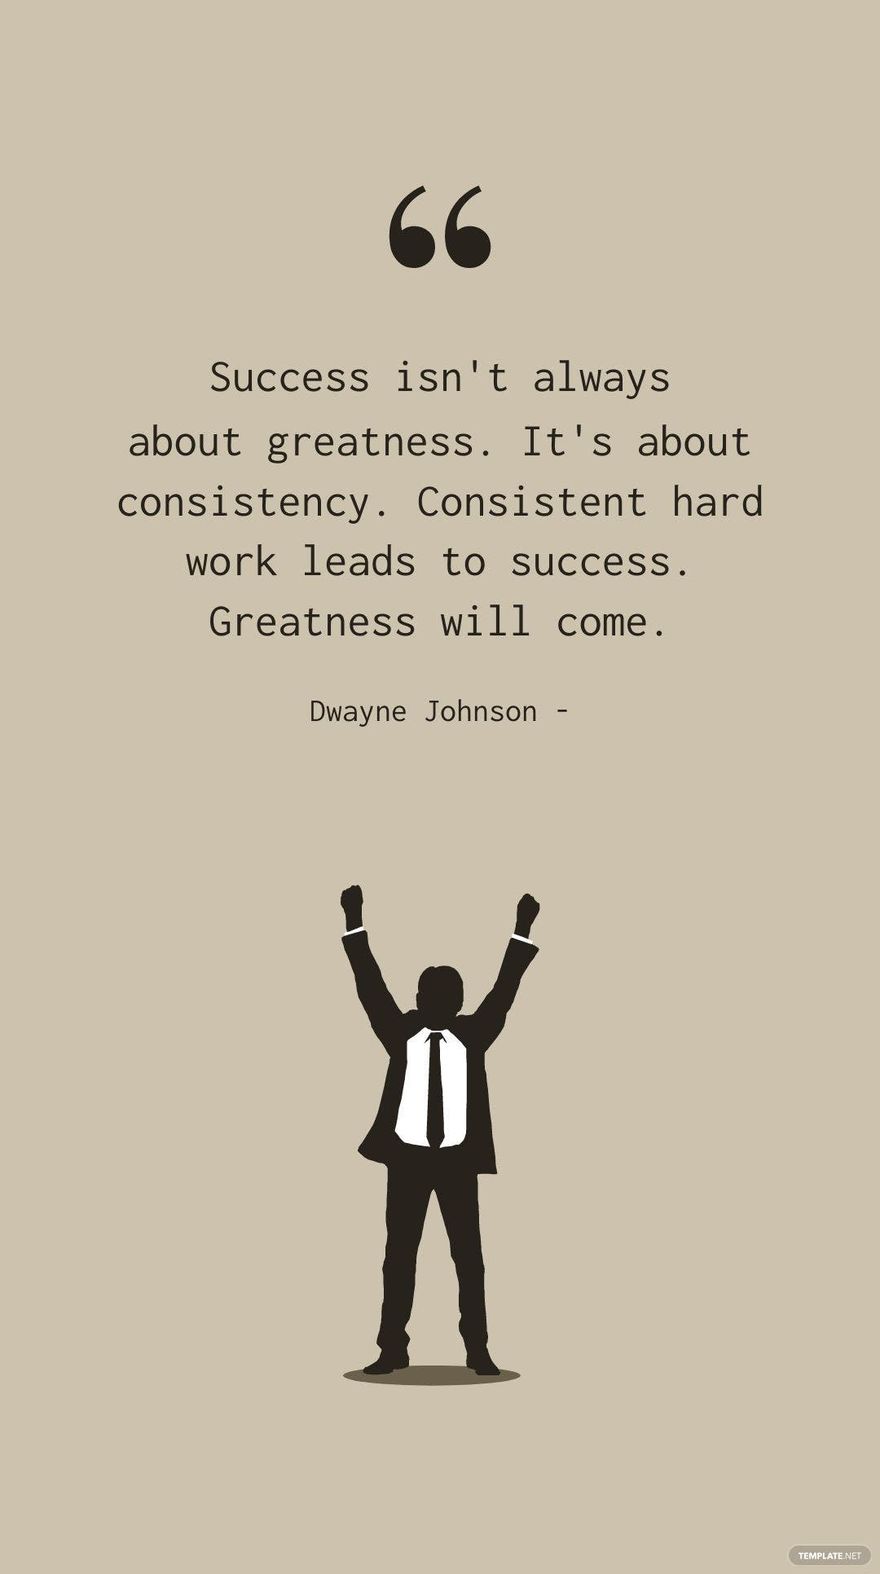 Free Dwayne Johnson - Success isn't always about greatness. It's about consistency. Consistent hard work leads to success. Greatness will come. in JPG